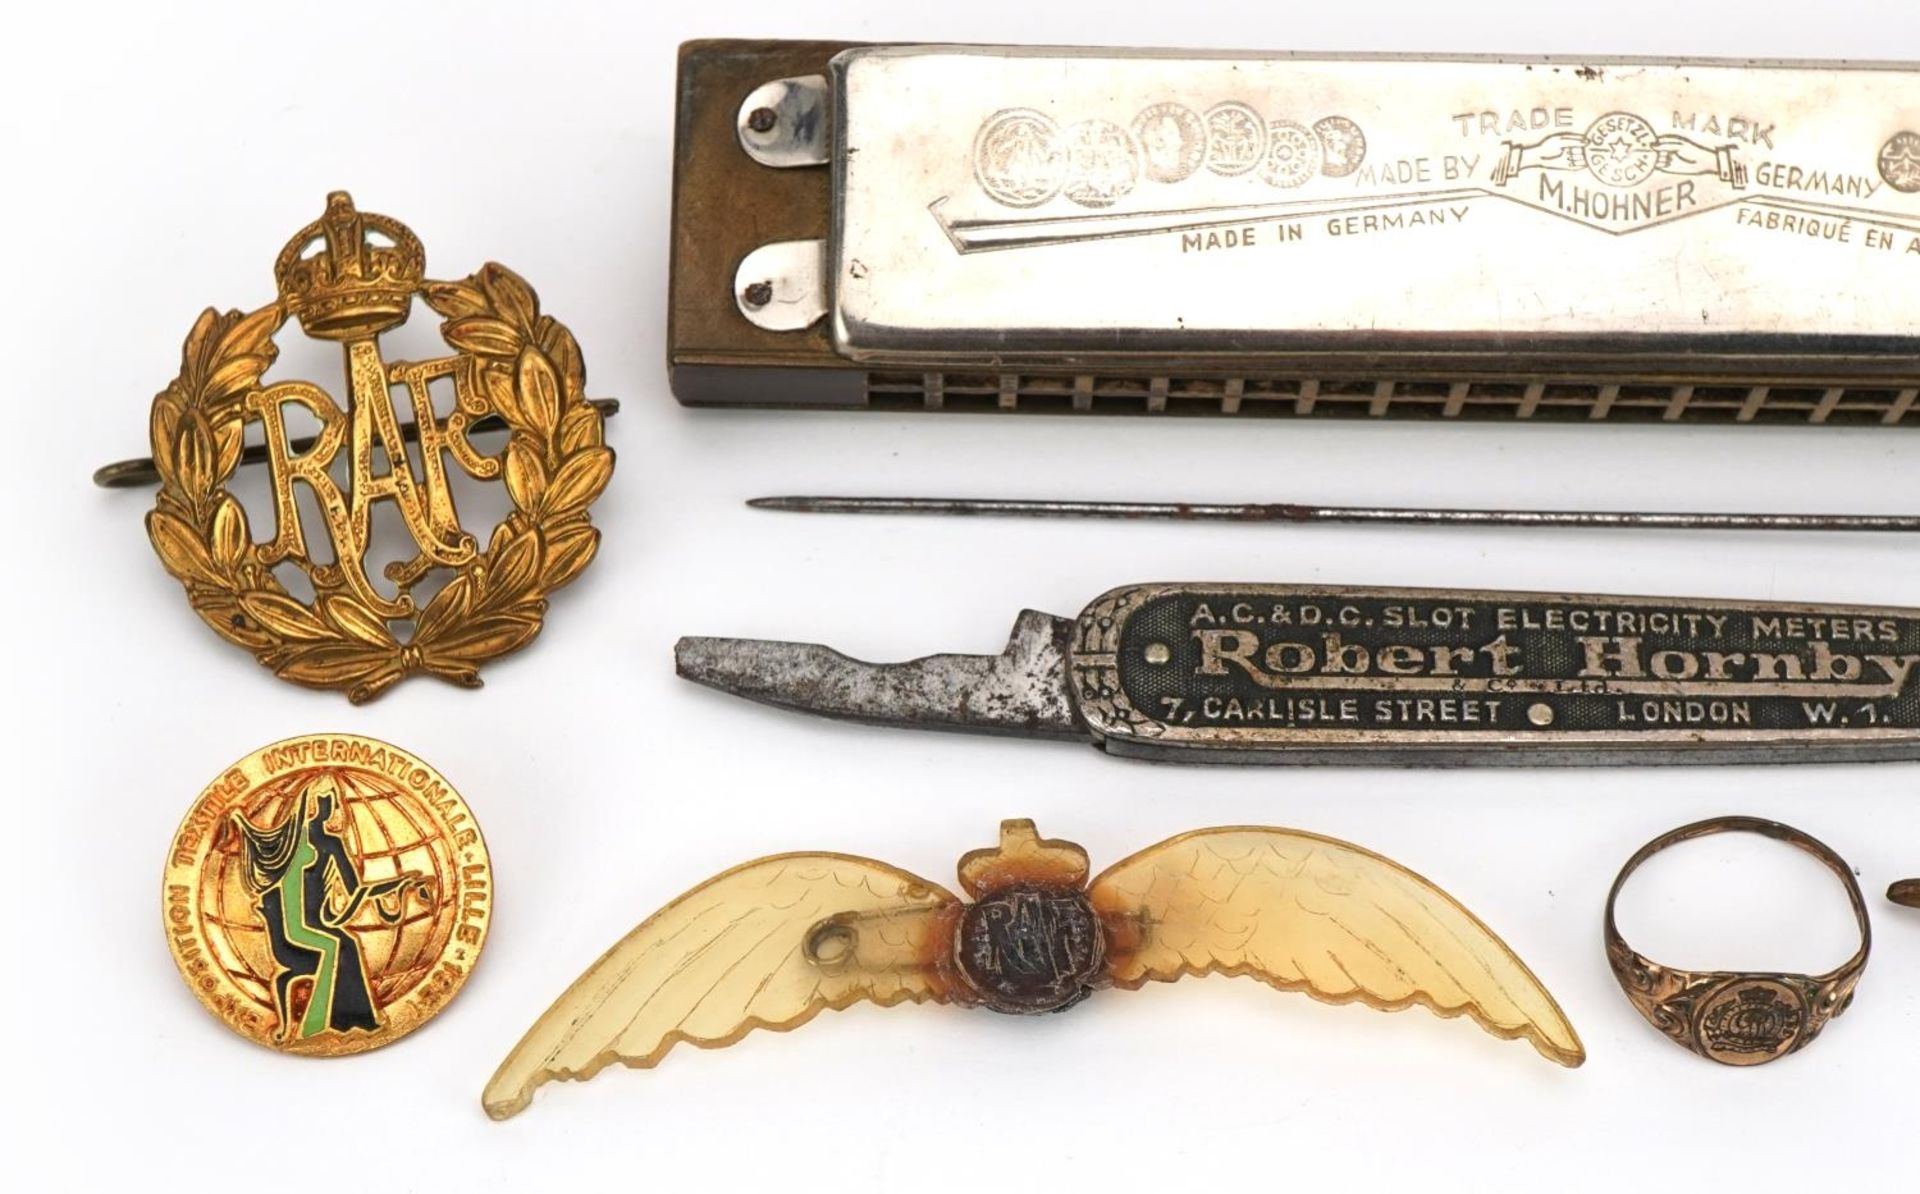 Objects including RAF military badges, Song Band harmonica, Robert Hornby folding pocket knife and - Image 2 of 4